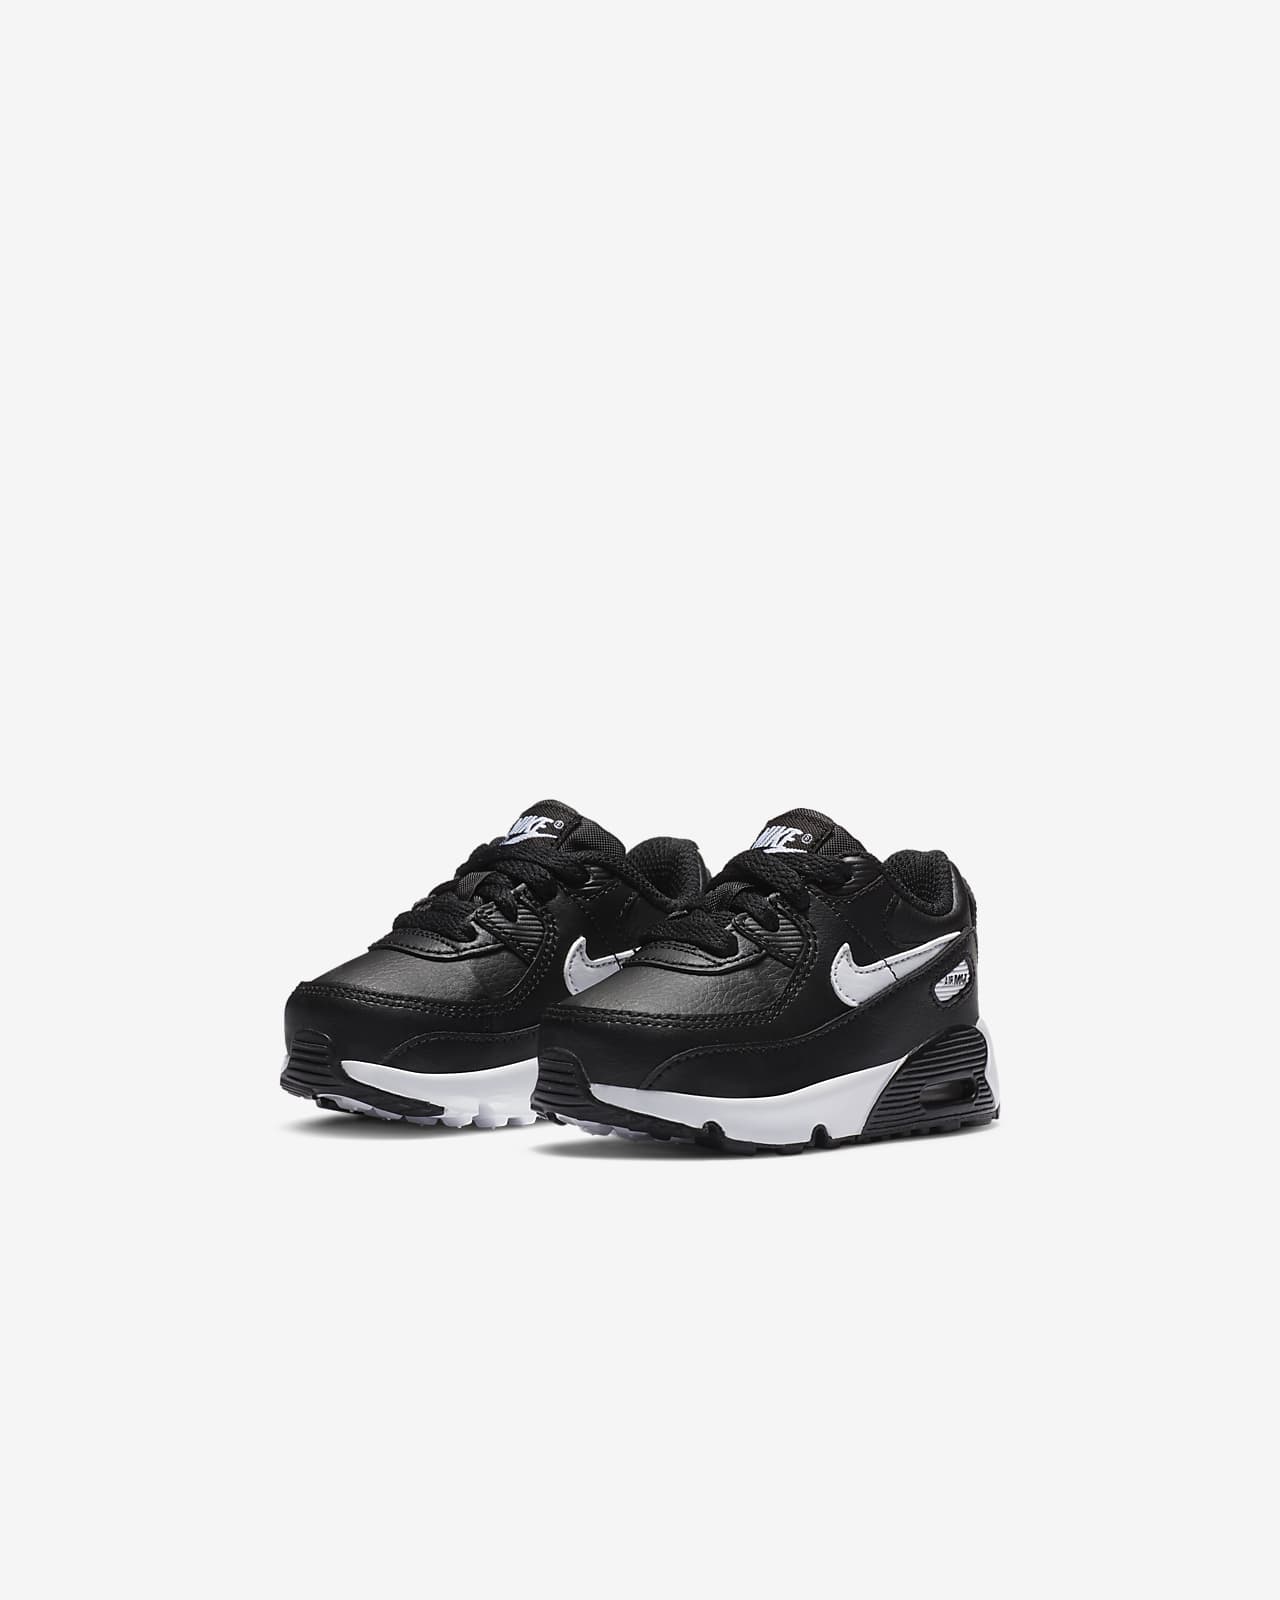 Nike Air Max 90 LTR Baby/Toddler Shoes.